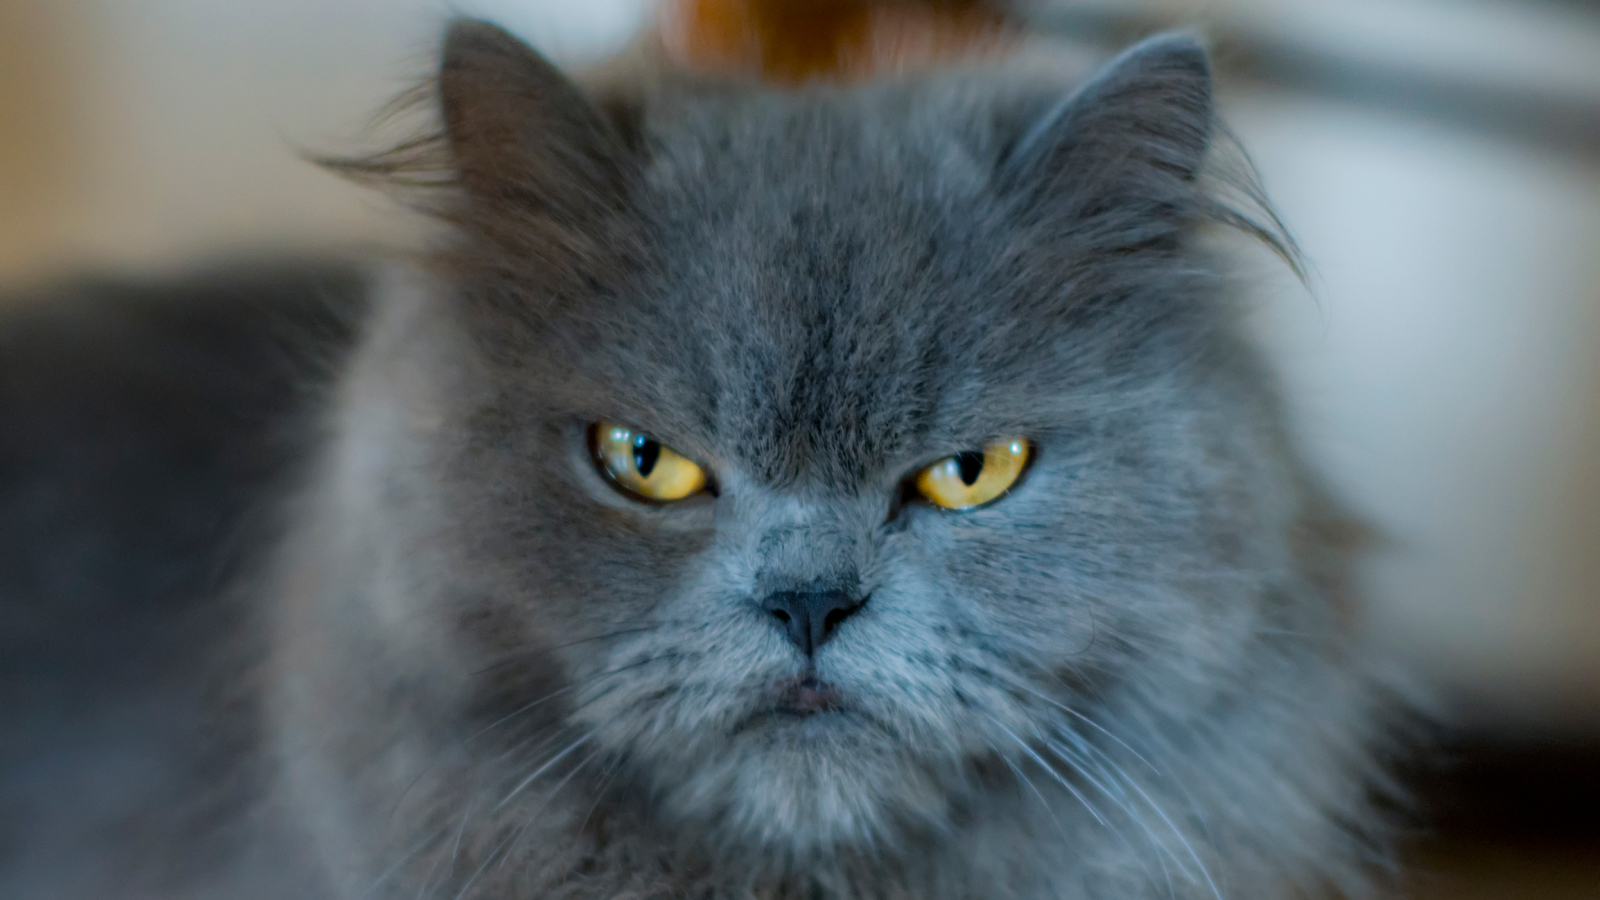 Do cats really hate us?